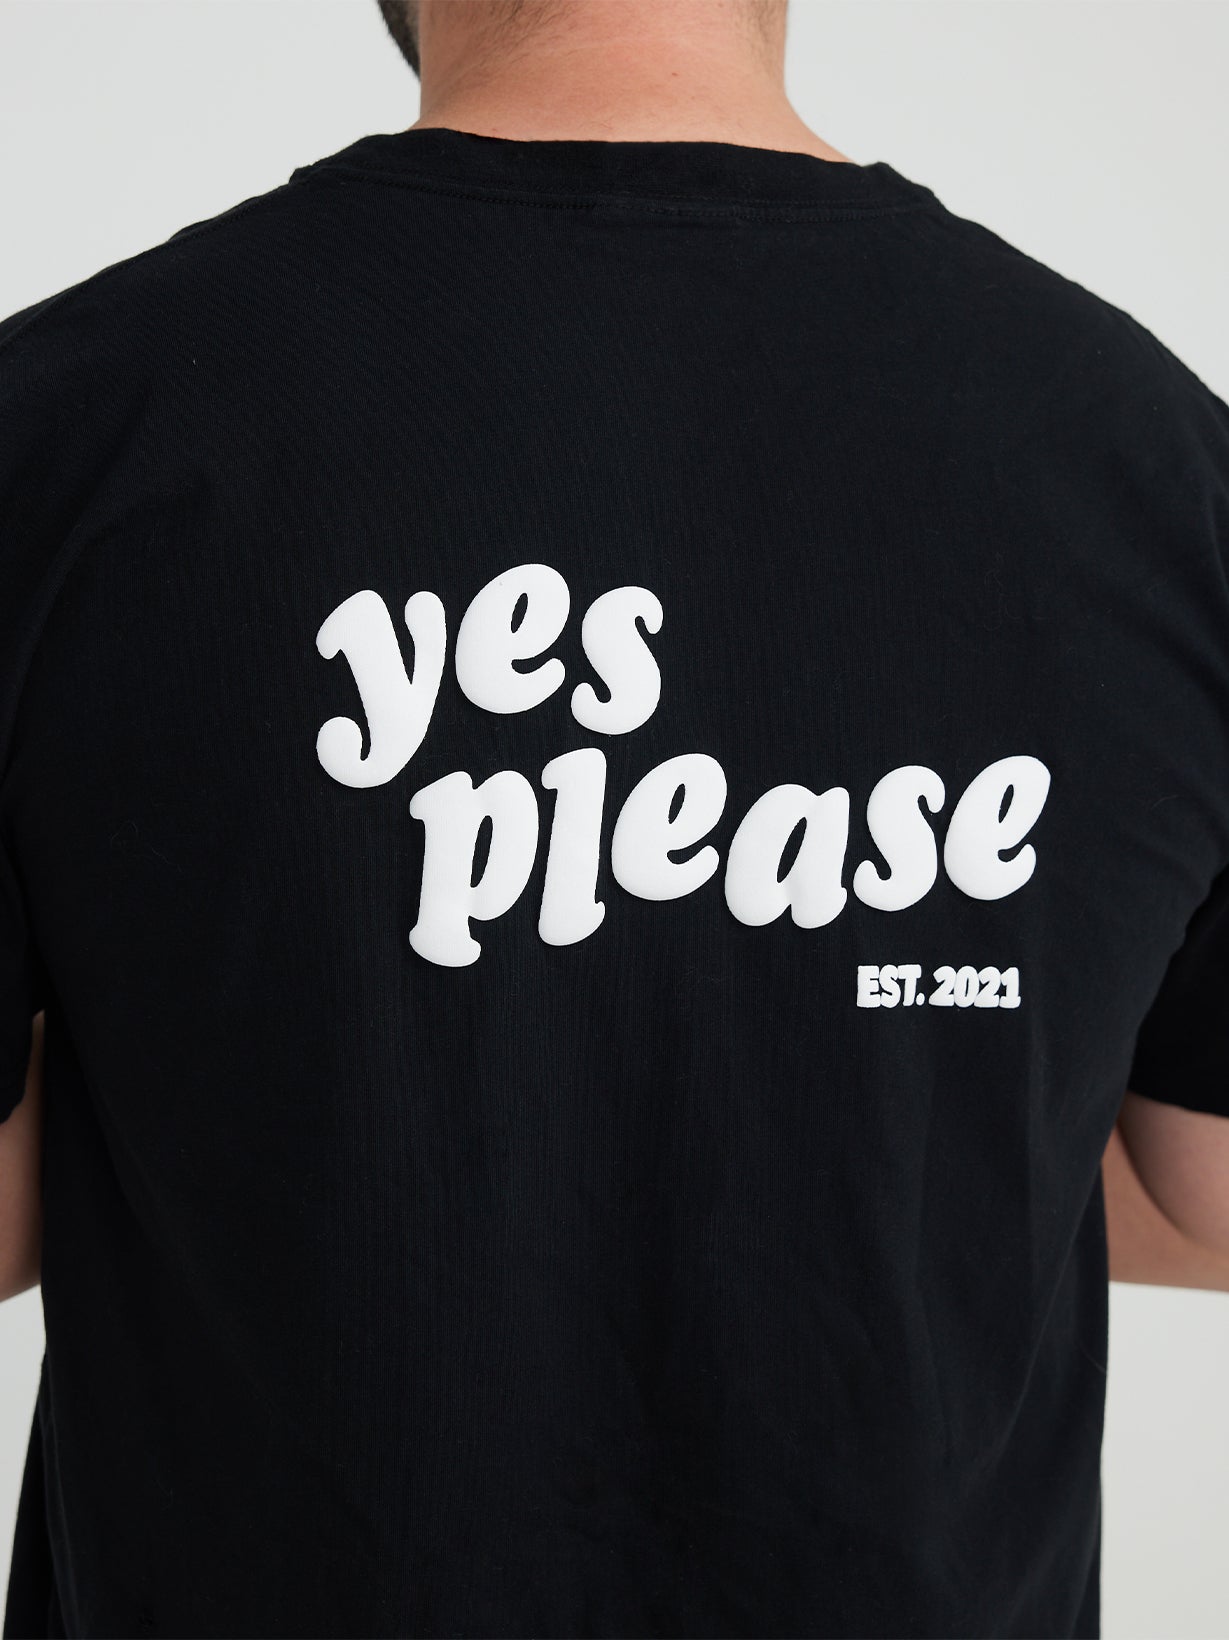 Yes Please Tee - Black with White